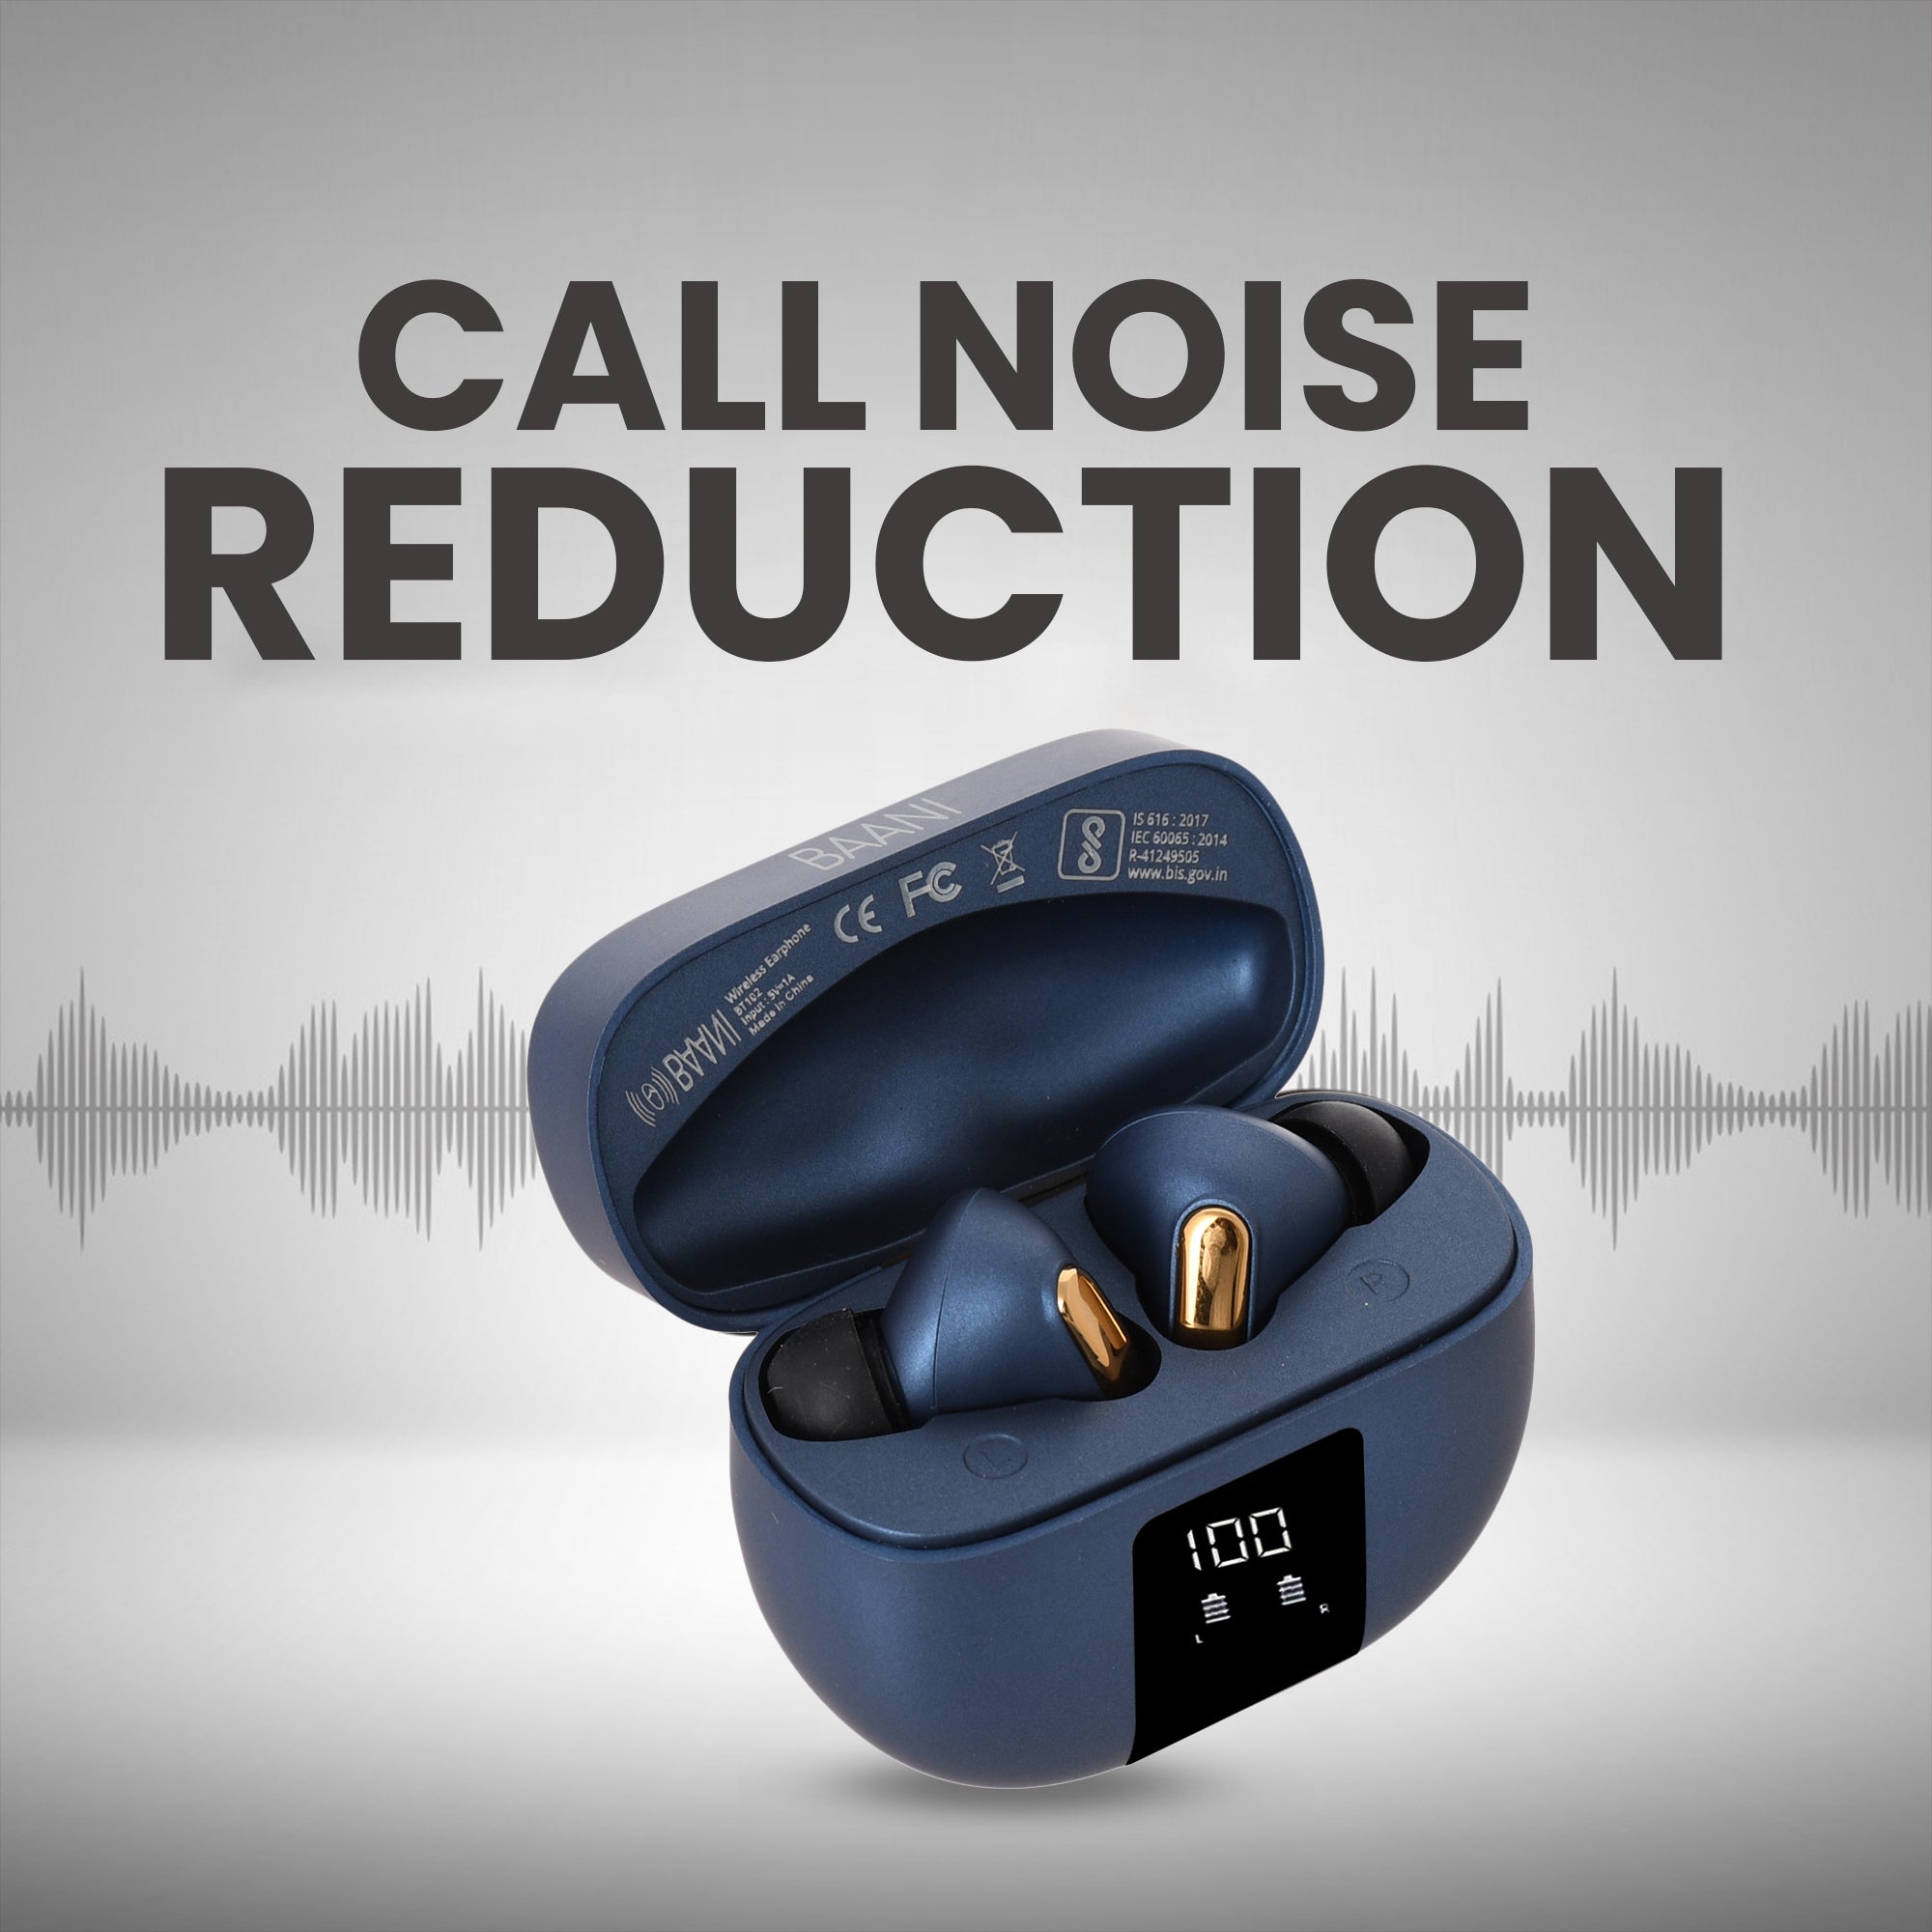 Noise cancellation feature of BT 102 Earbuds in blue colour